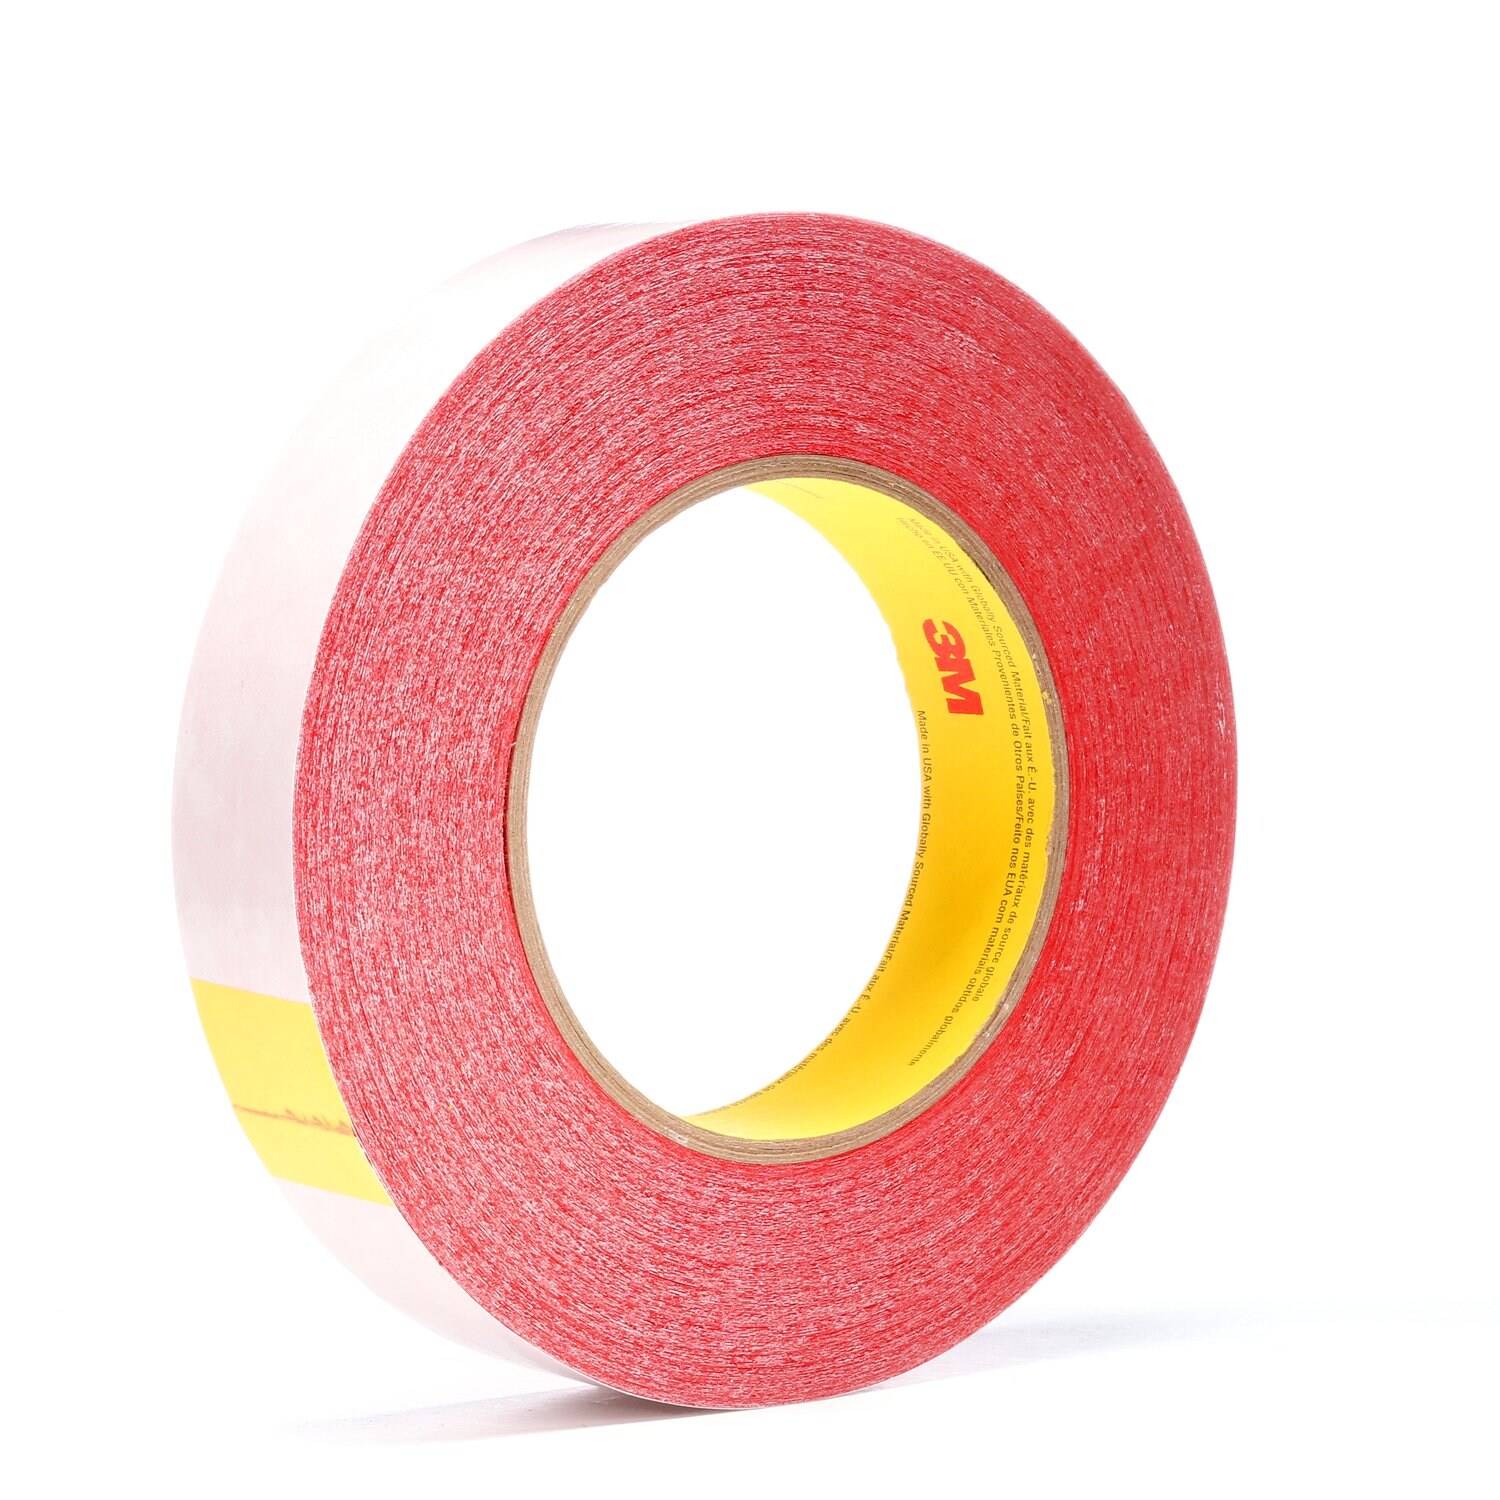 7000049263 - 3M Double Coated Tape 9737R, Red, 24 mm x 55 m, 3.5 mil, 48 rolls per
case